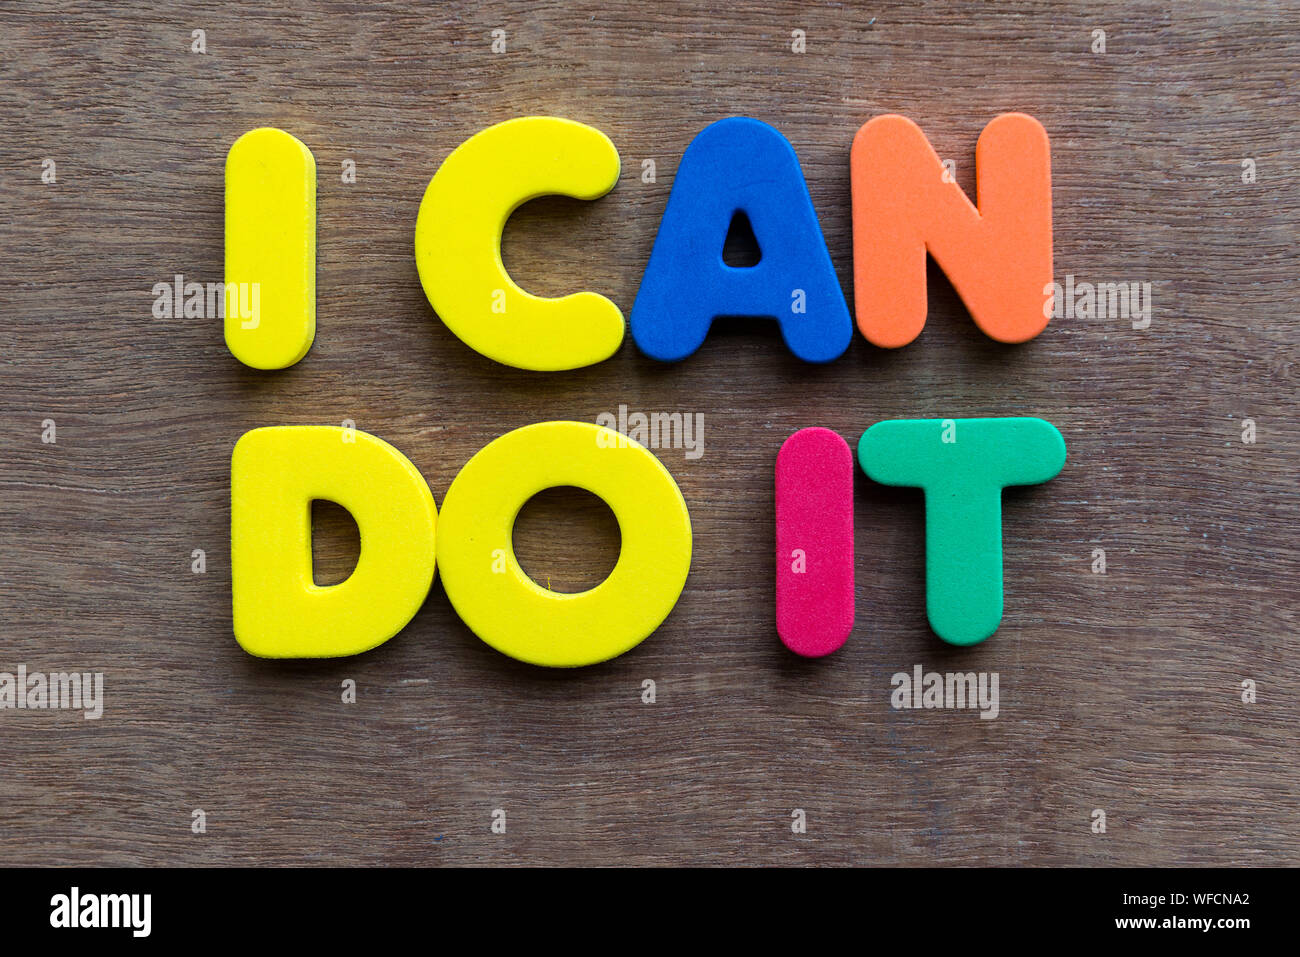 I now i can do this. I can do it надпись. Картинки i can. I can't do it картинка. I can do it Wallpaper.